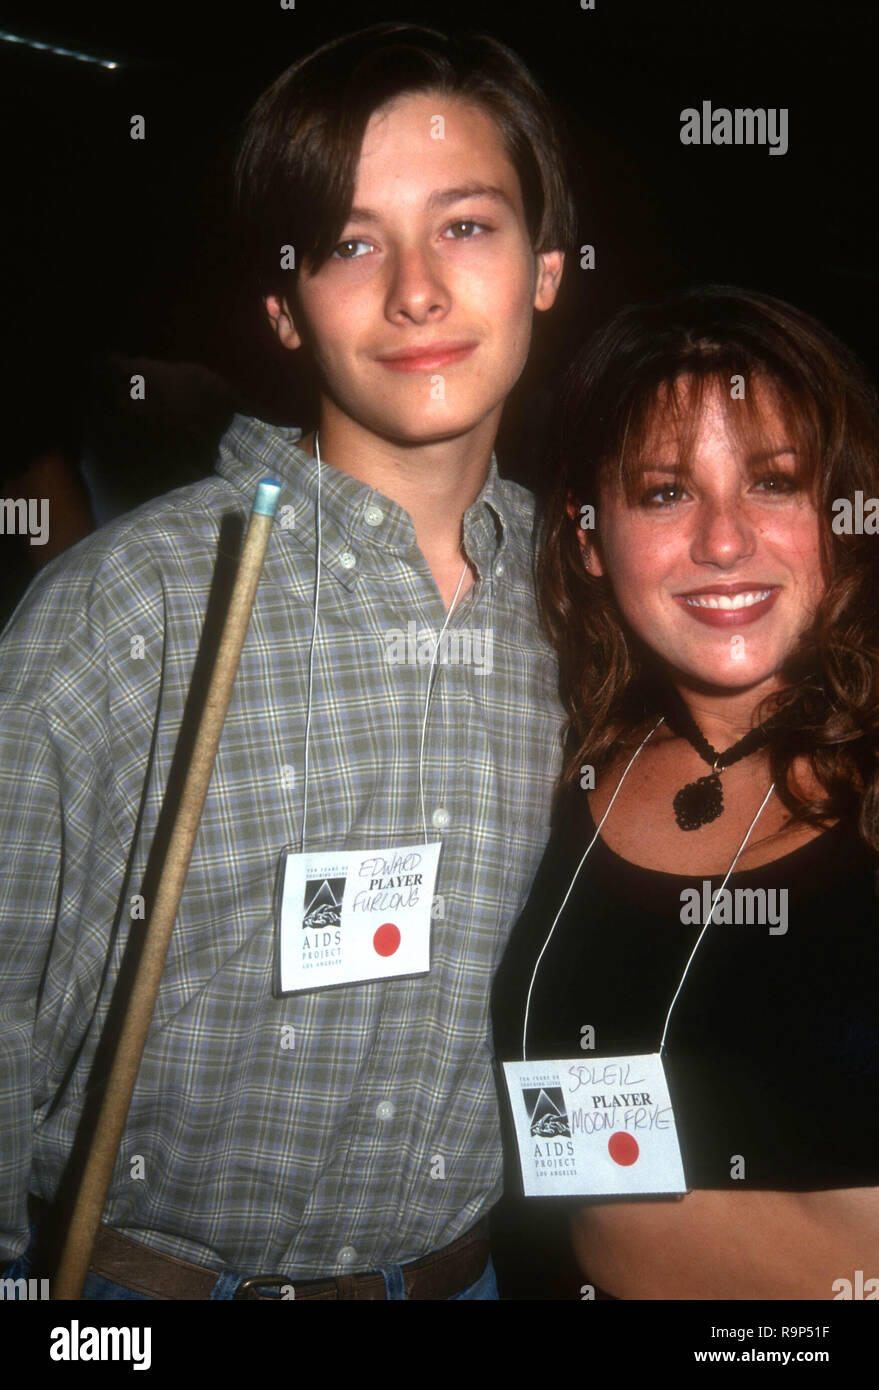 HOLLYWOOD, CA - JUNE 19: Actor Edward Furlong and actress Soleil Moon Frye attend the Second Annual Celebrity Pool Tournament to Benefit AIDS Project Los Angeles on June 19, 1993 at the Hollywood Athletic Club in Hollywood, California. Photo by Barry King/Alamy Stock Photo Stock Photo